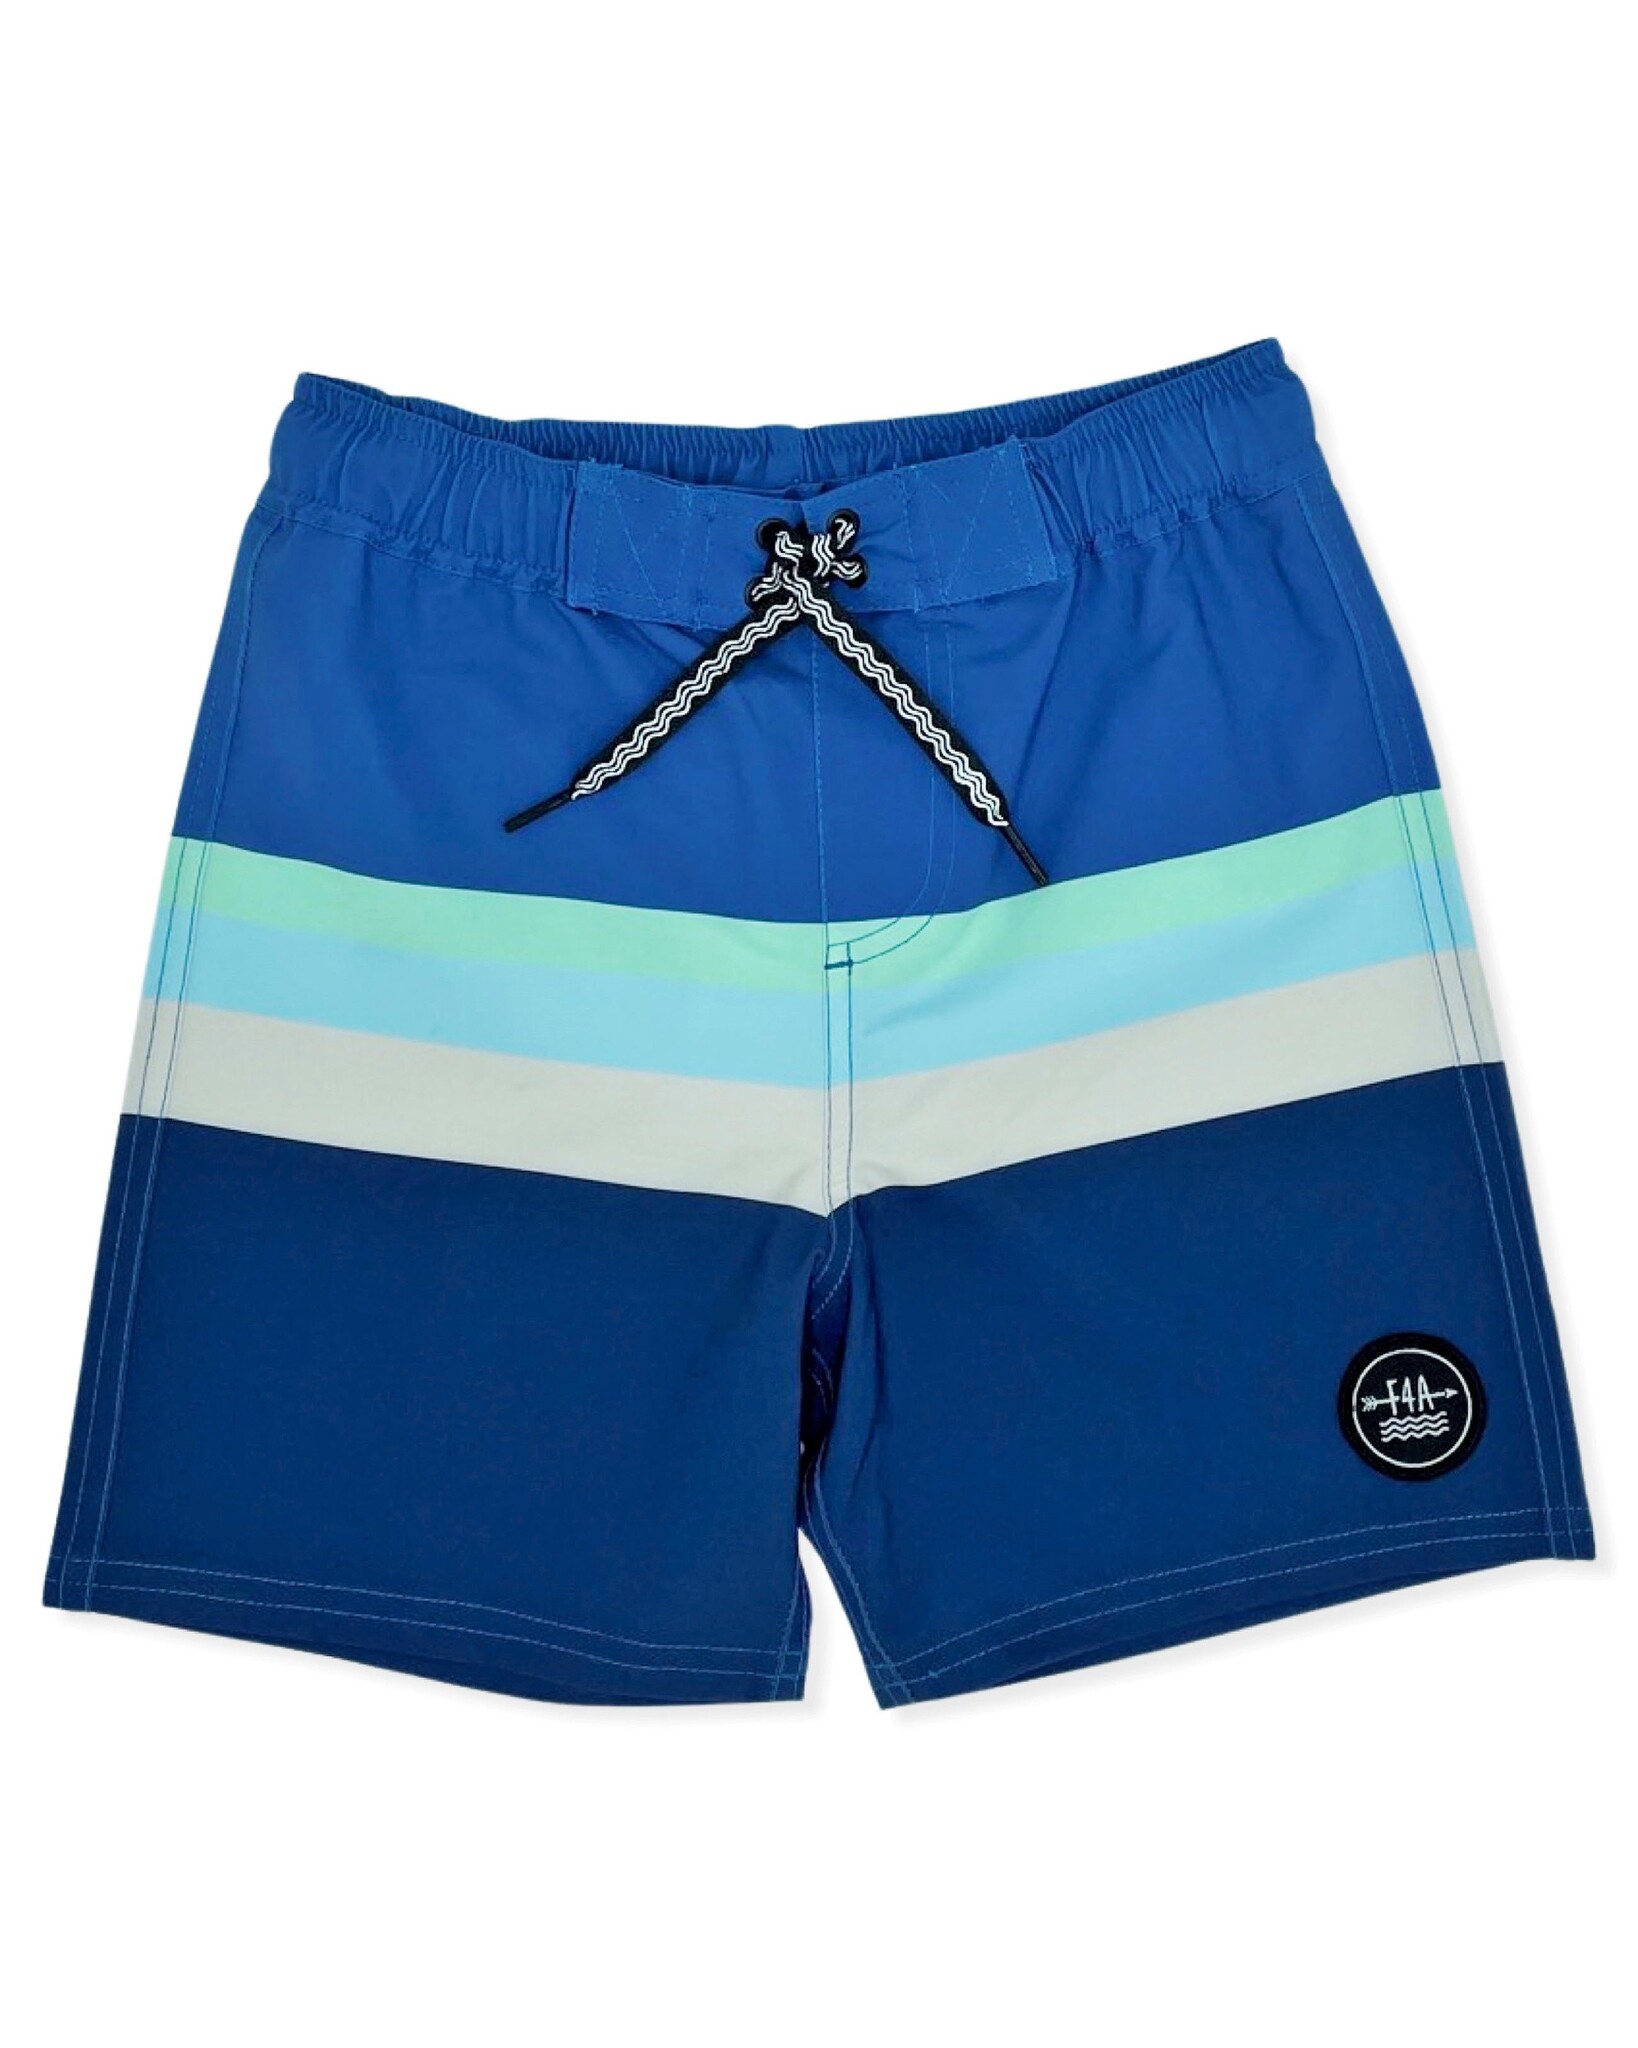 Feather 4 Arrow - Kids Voyager Boardshort - NVY - Yellow Turtle